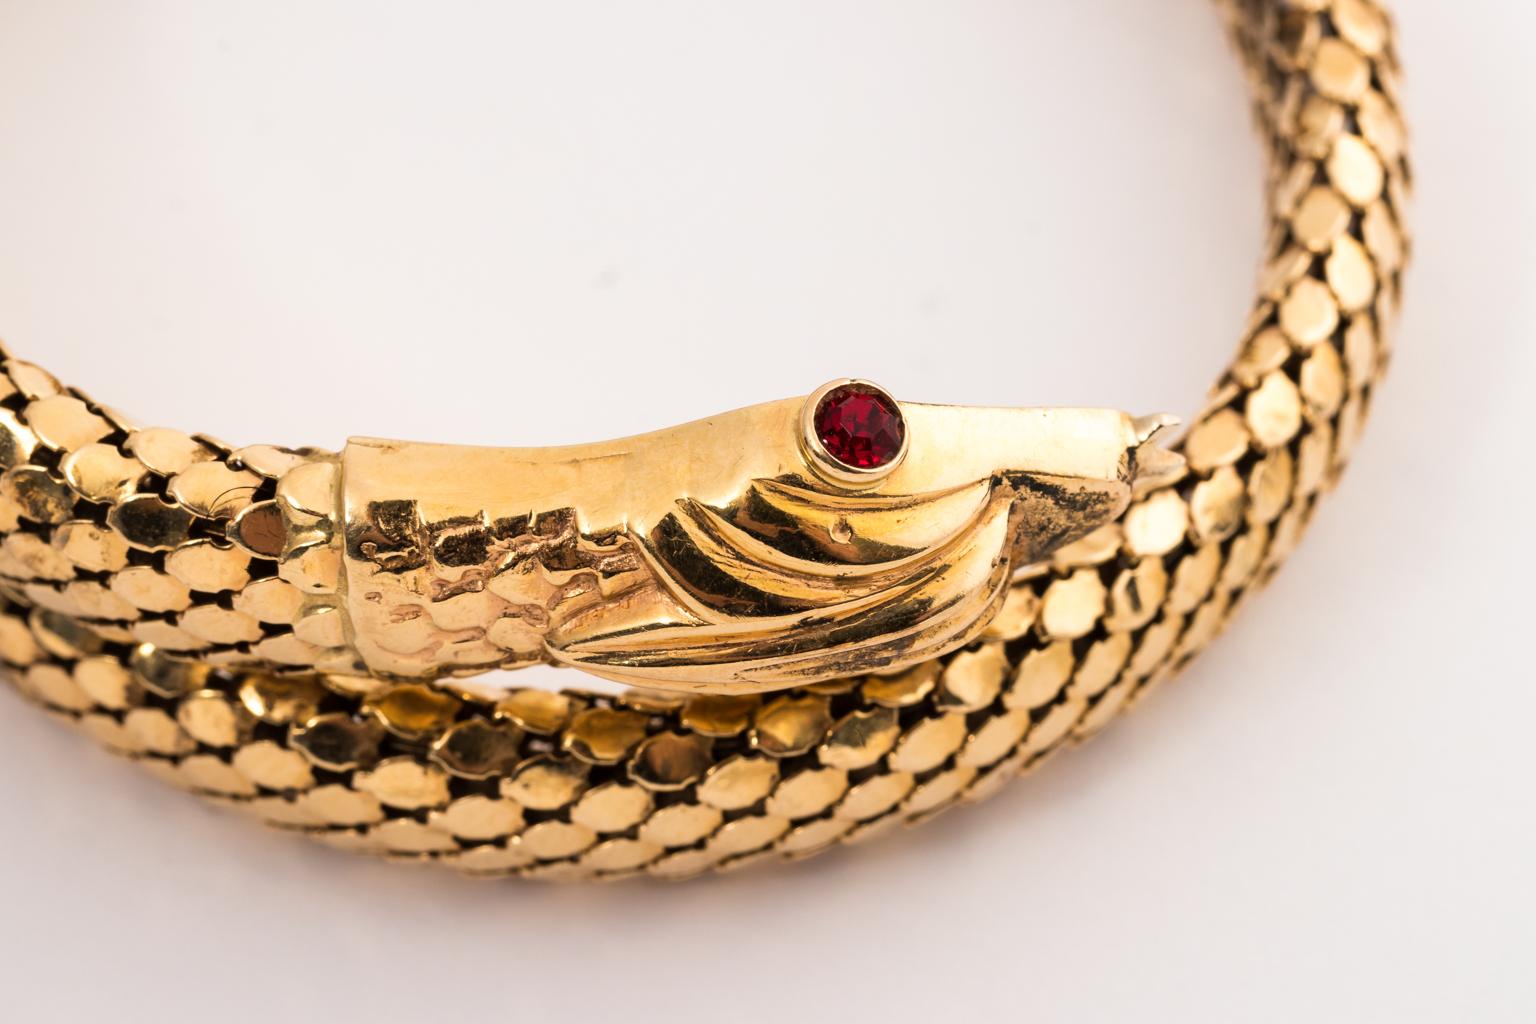 Circa 1950-1960 coiled serpent bracelet in a scale like finish of solid 18 karat gold. The bracelet features a detailed head with Ruby eyes. Made in Italy.
